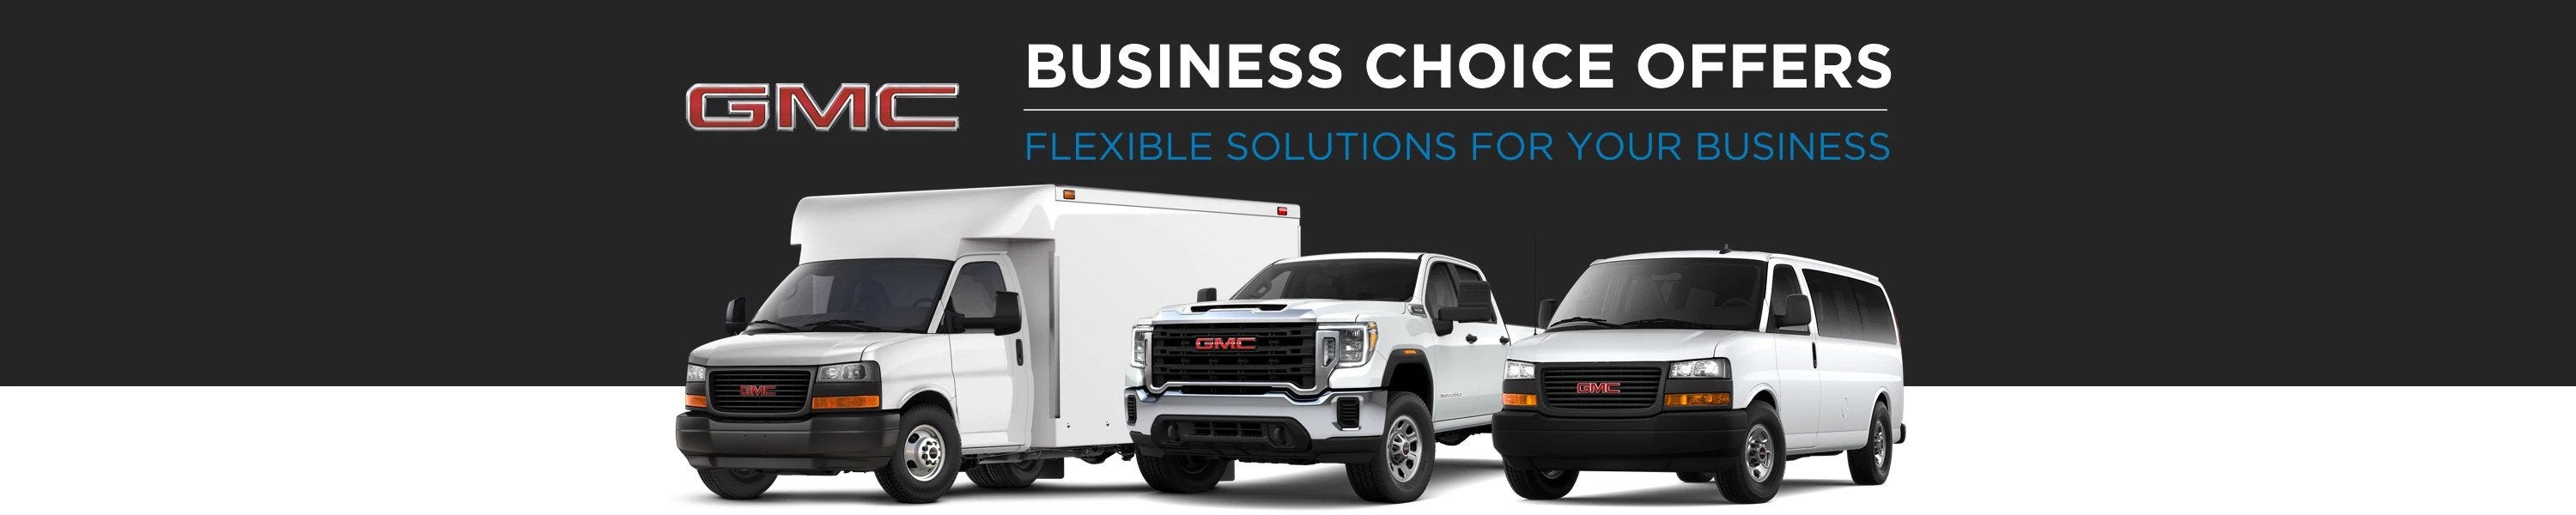 GMC Business Choice Offers - Flexible Solutions for your Business - Romeo Chevrolet Buick GMC in Lake Katrine NY